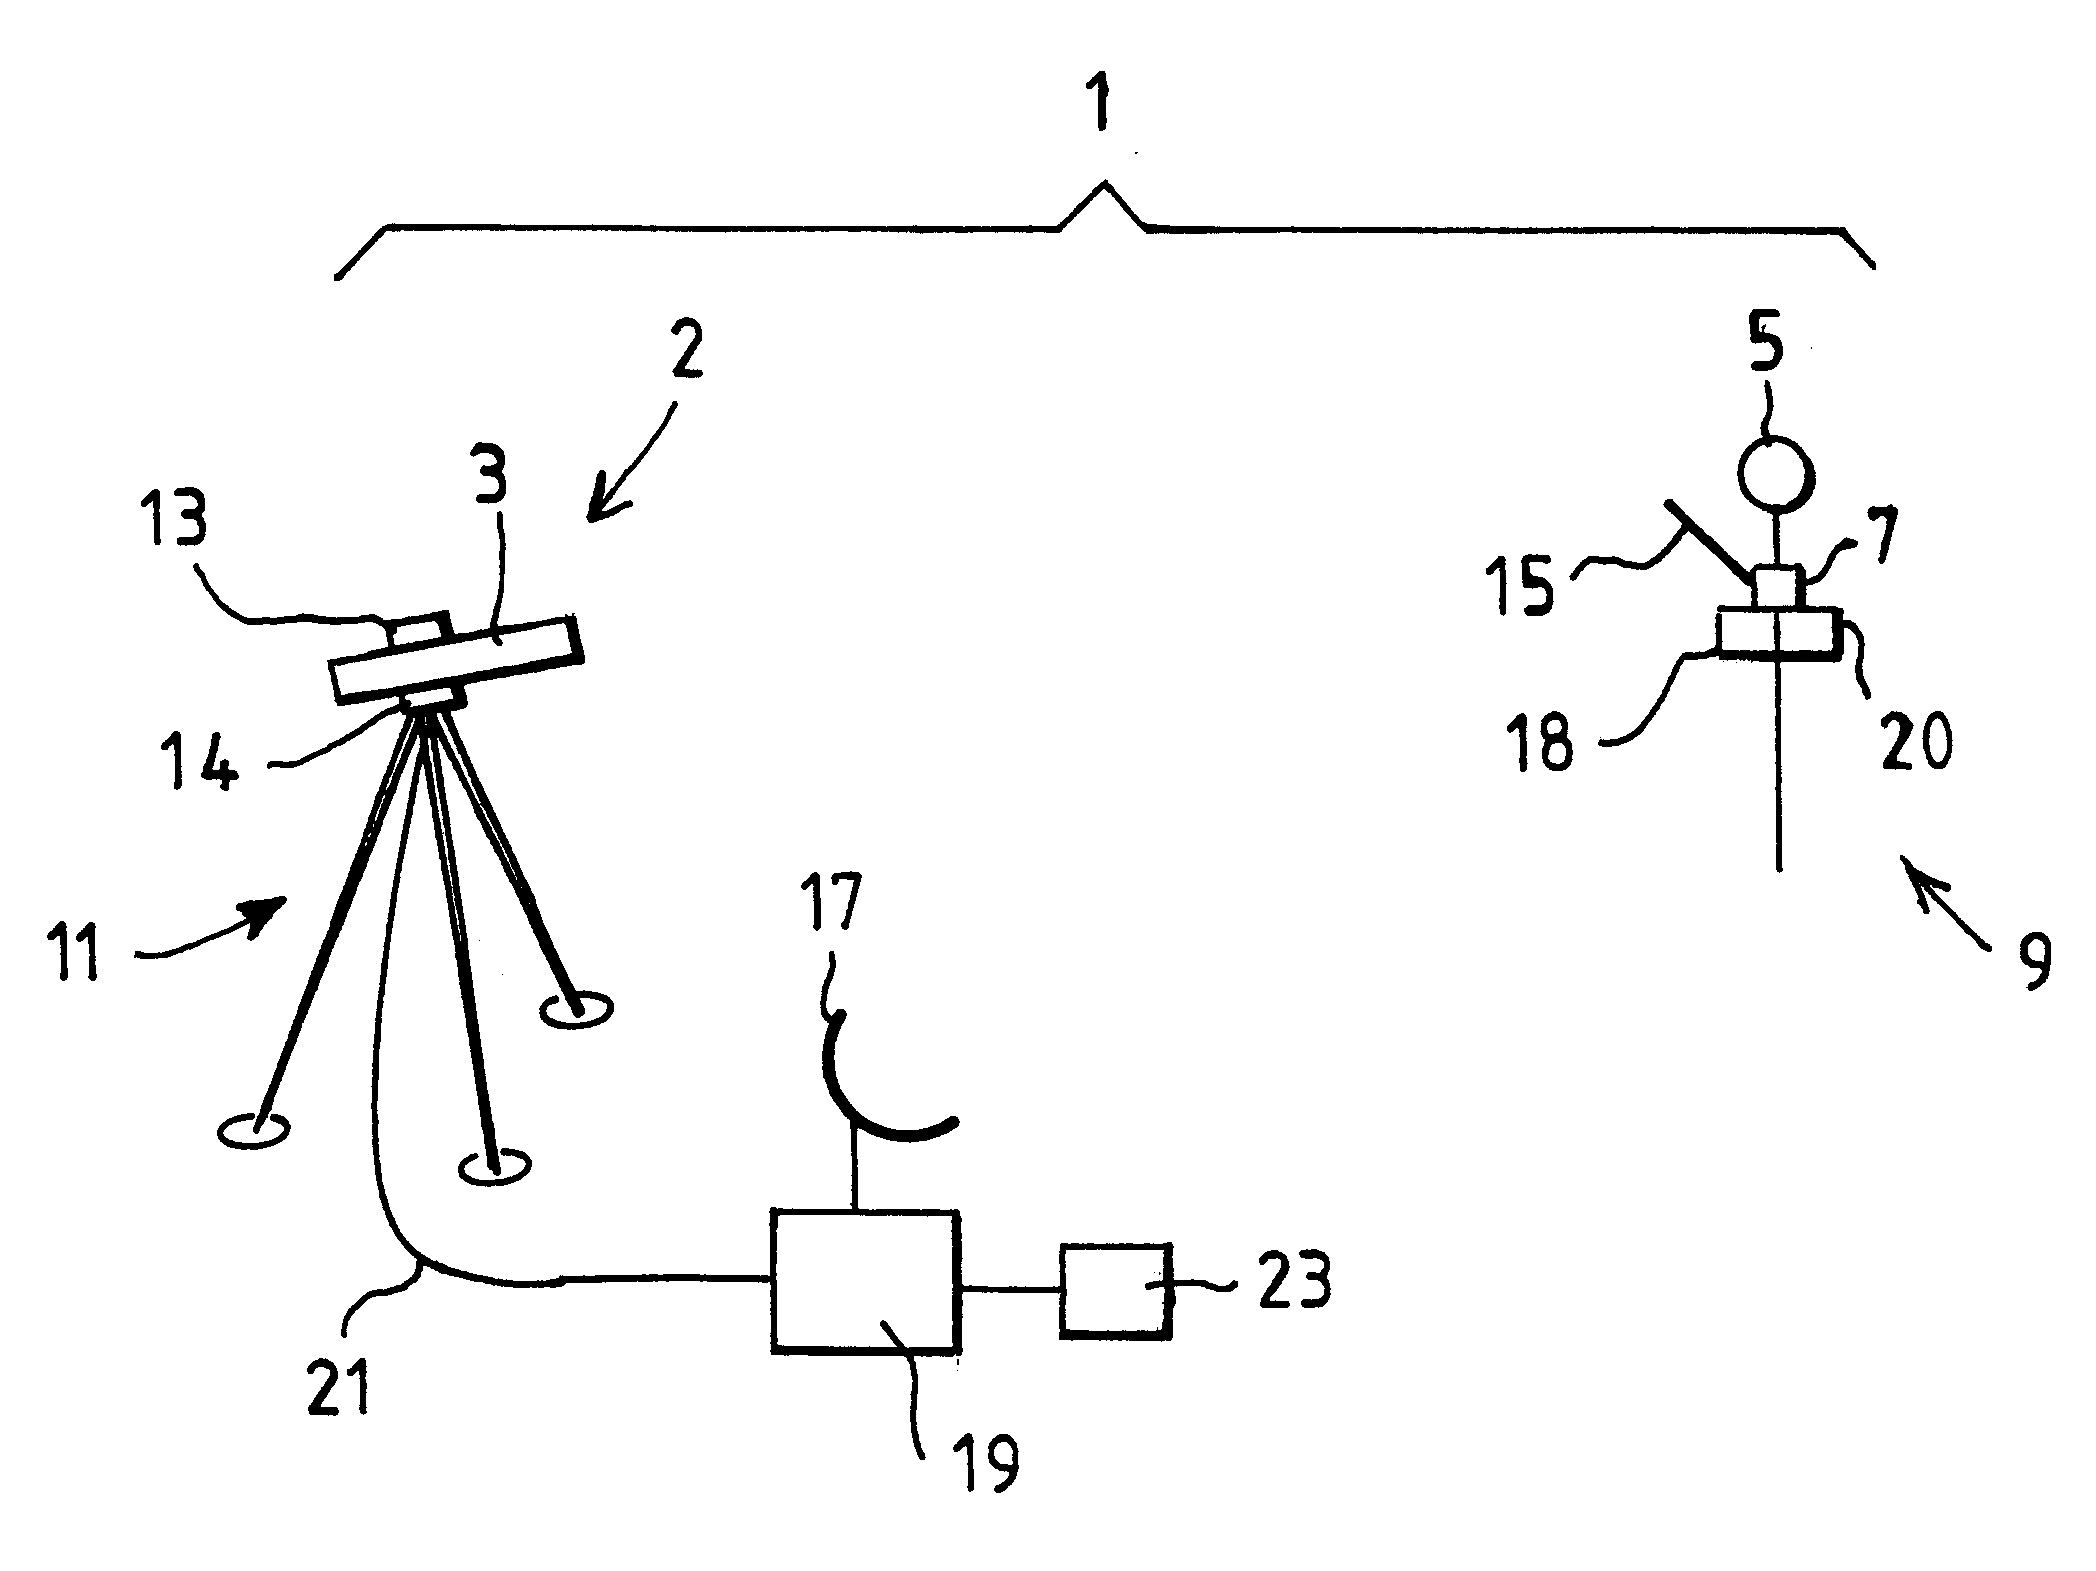 Surveying system with an inertial measuring device